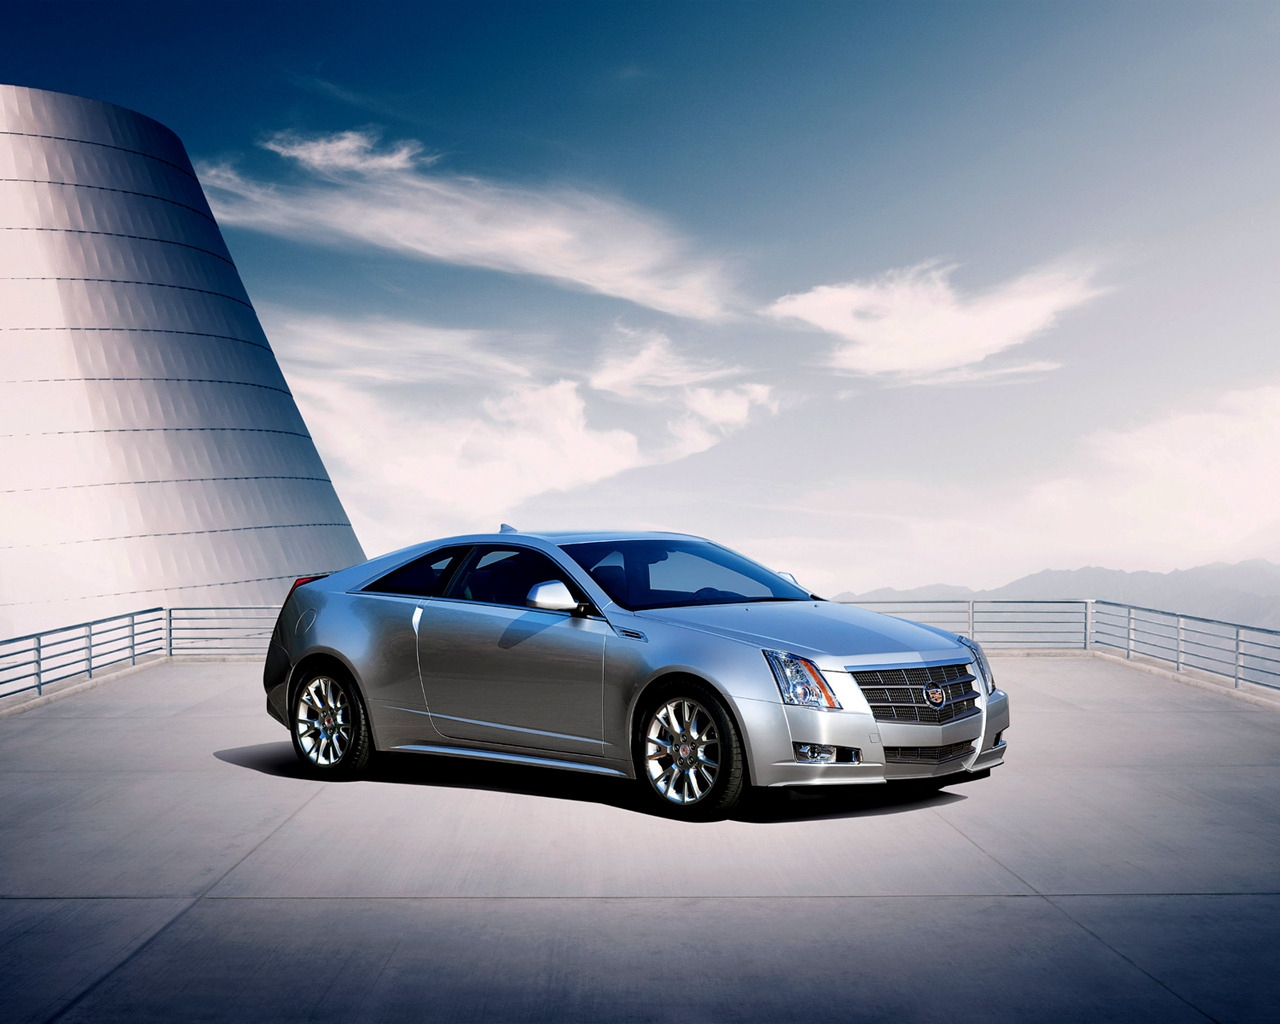 2011 Cadillac CTS Coupe for 1280 x 1024 resolution